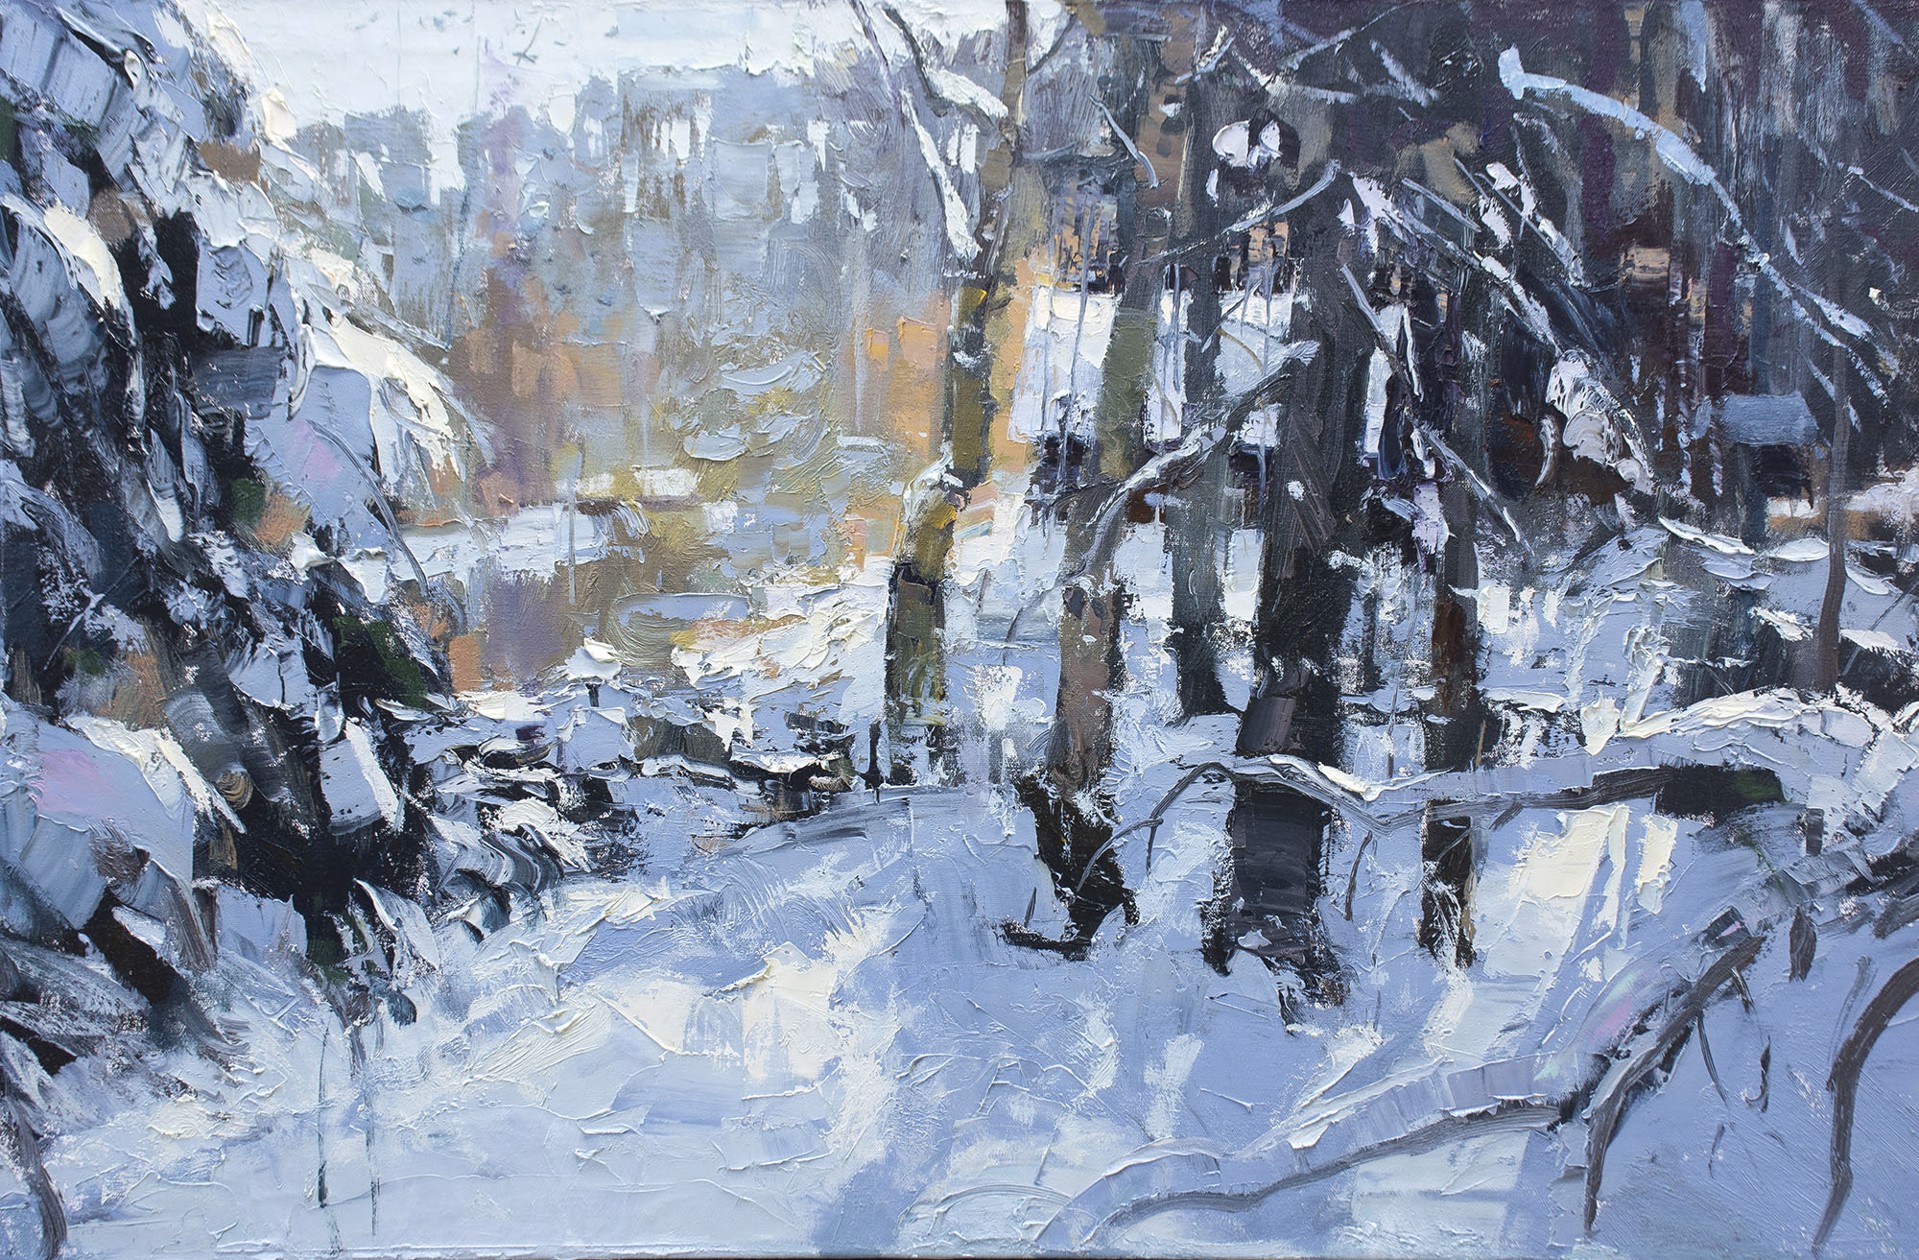 Original Oil Painting Of A Winter Mountain Landscape